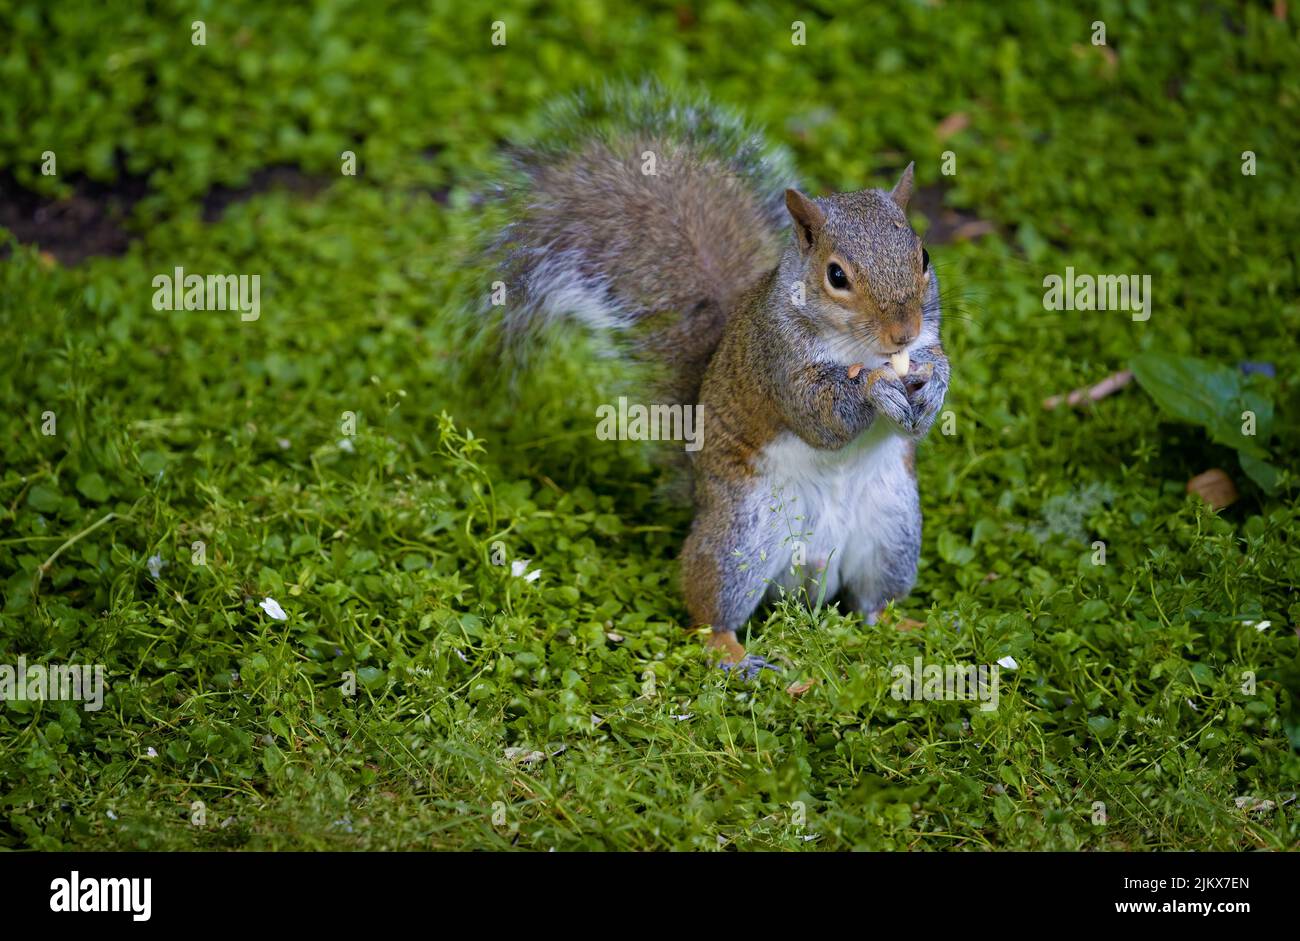 In a backyard a gray squirrel sits on his haunches while munching on a peanut. Stock Photo